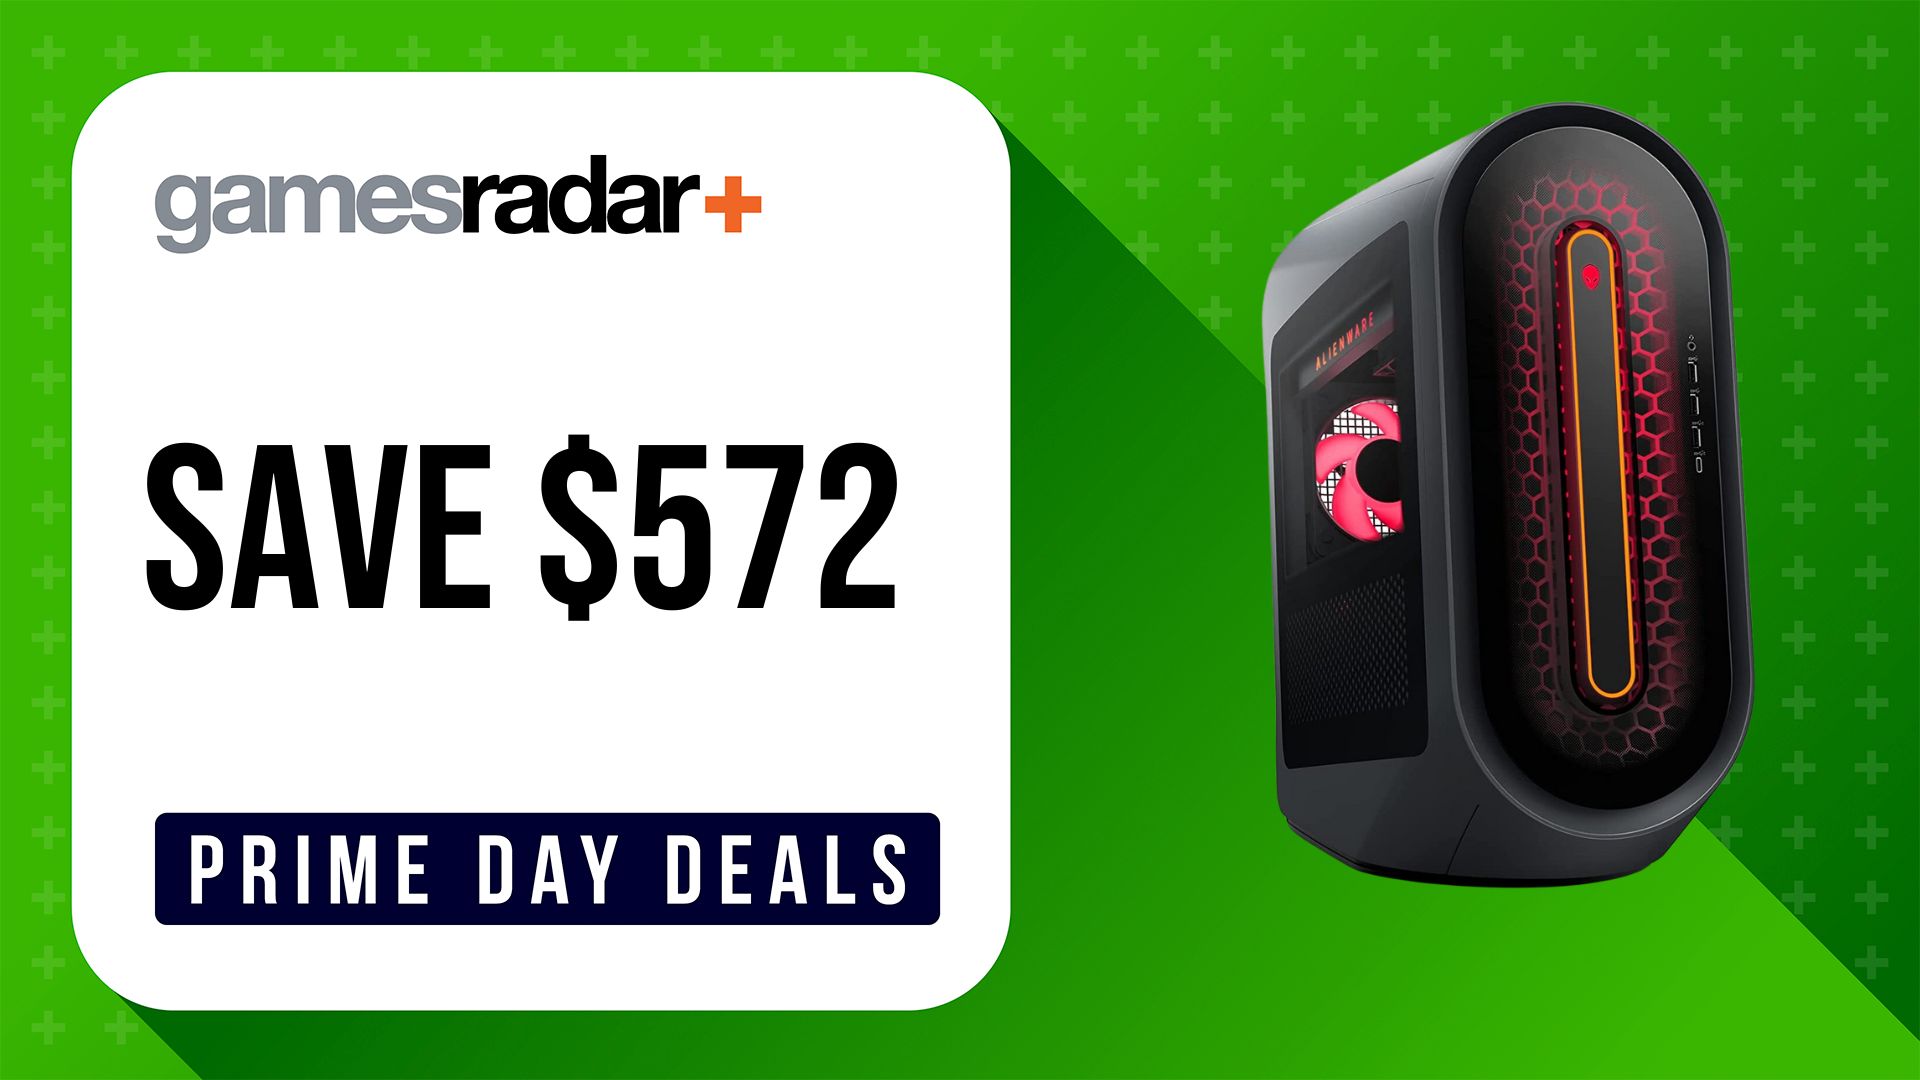 Alienware Aurora R15 Prime Day gaming pc deal with $572 saving stamp on a green background